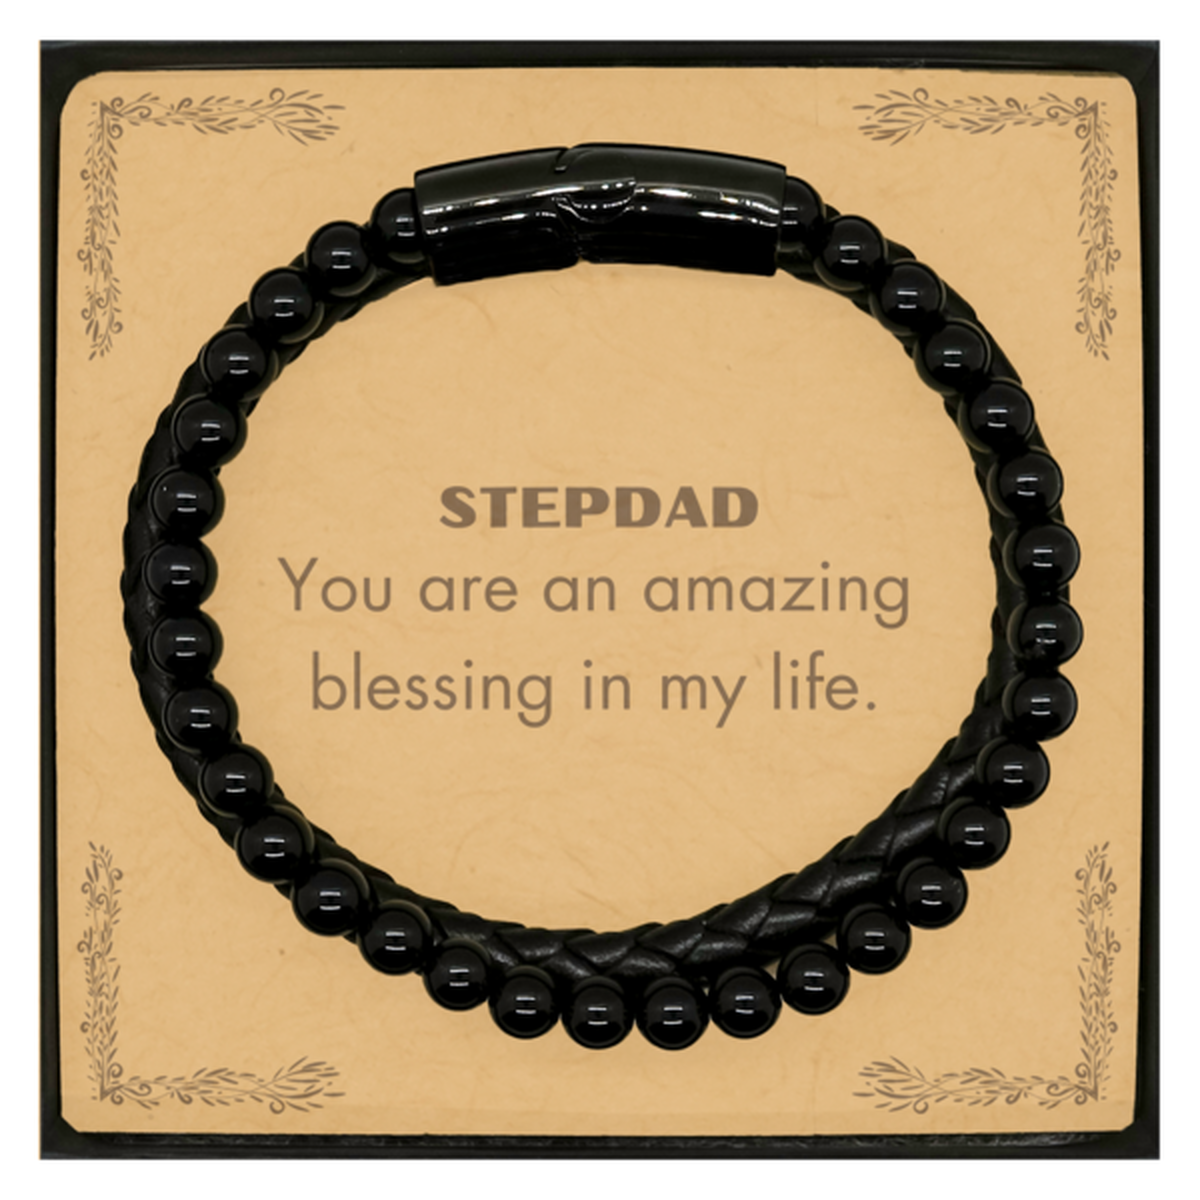 Stepdad Stone Leather Bracelets, You are an amazing blessing in my life, Thank You Gifts For Stepdad, Inspirational Birthday Christmas Unique Gifts For Stepdad